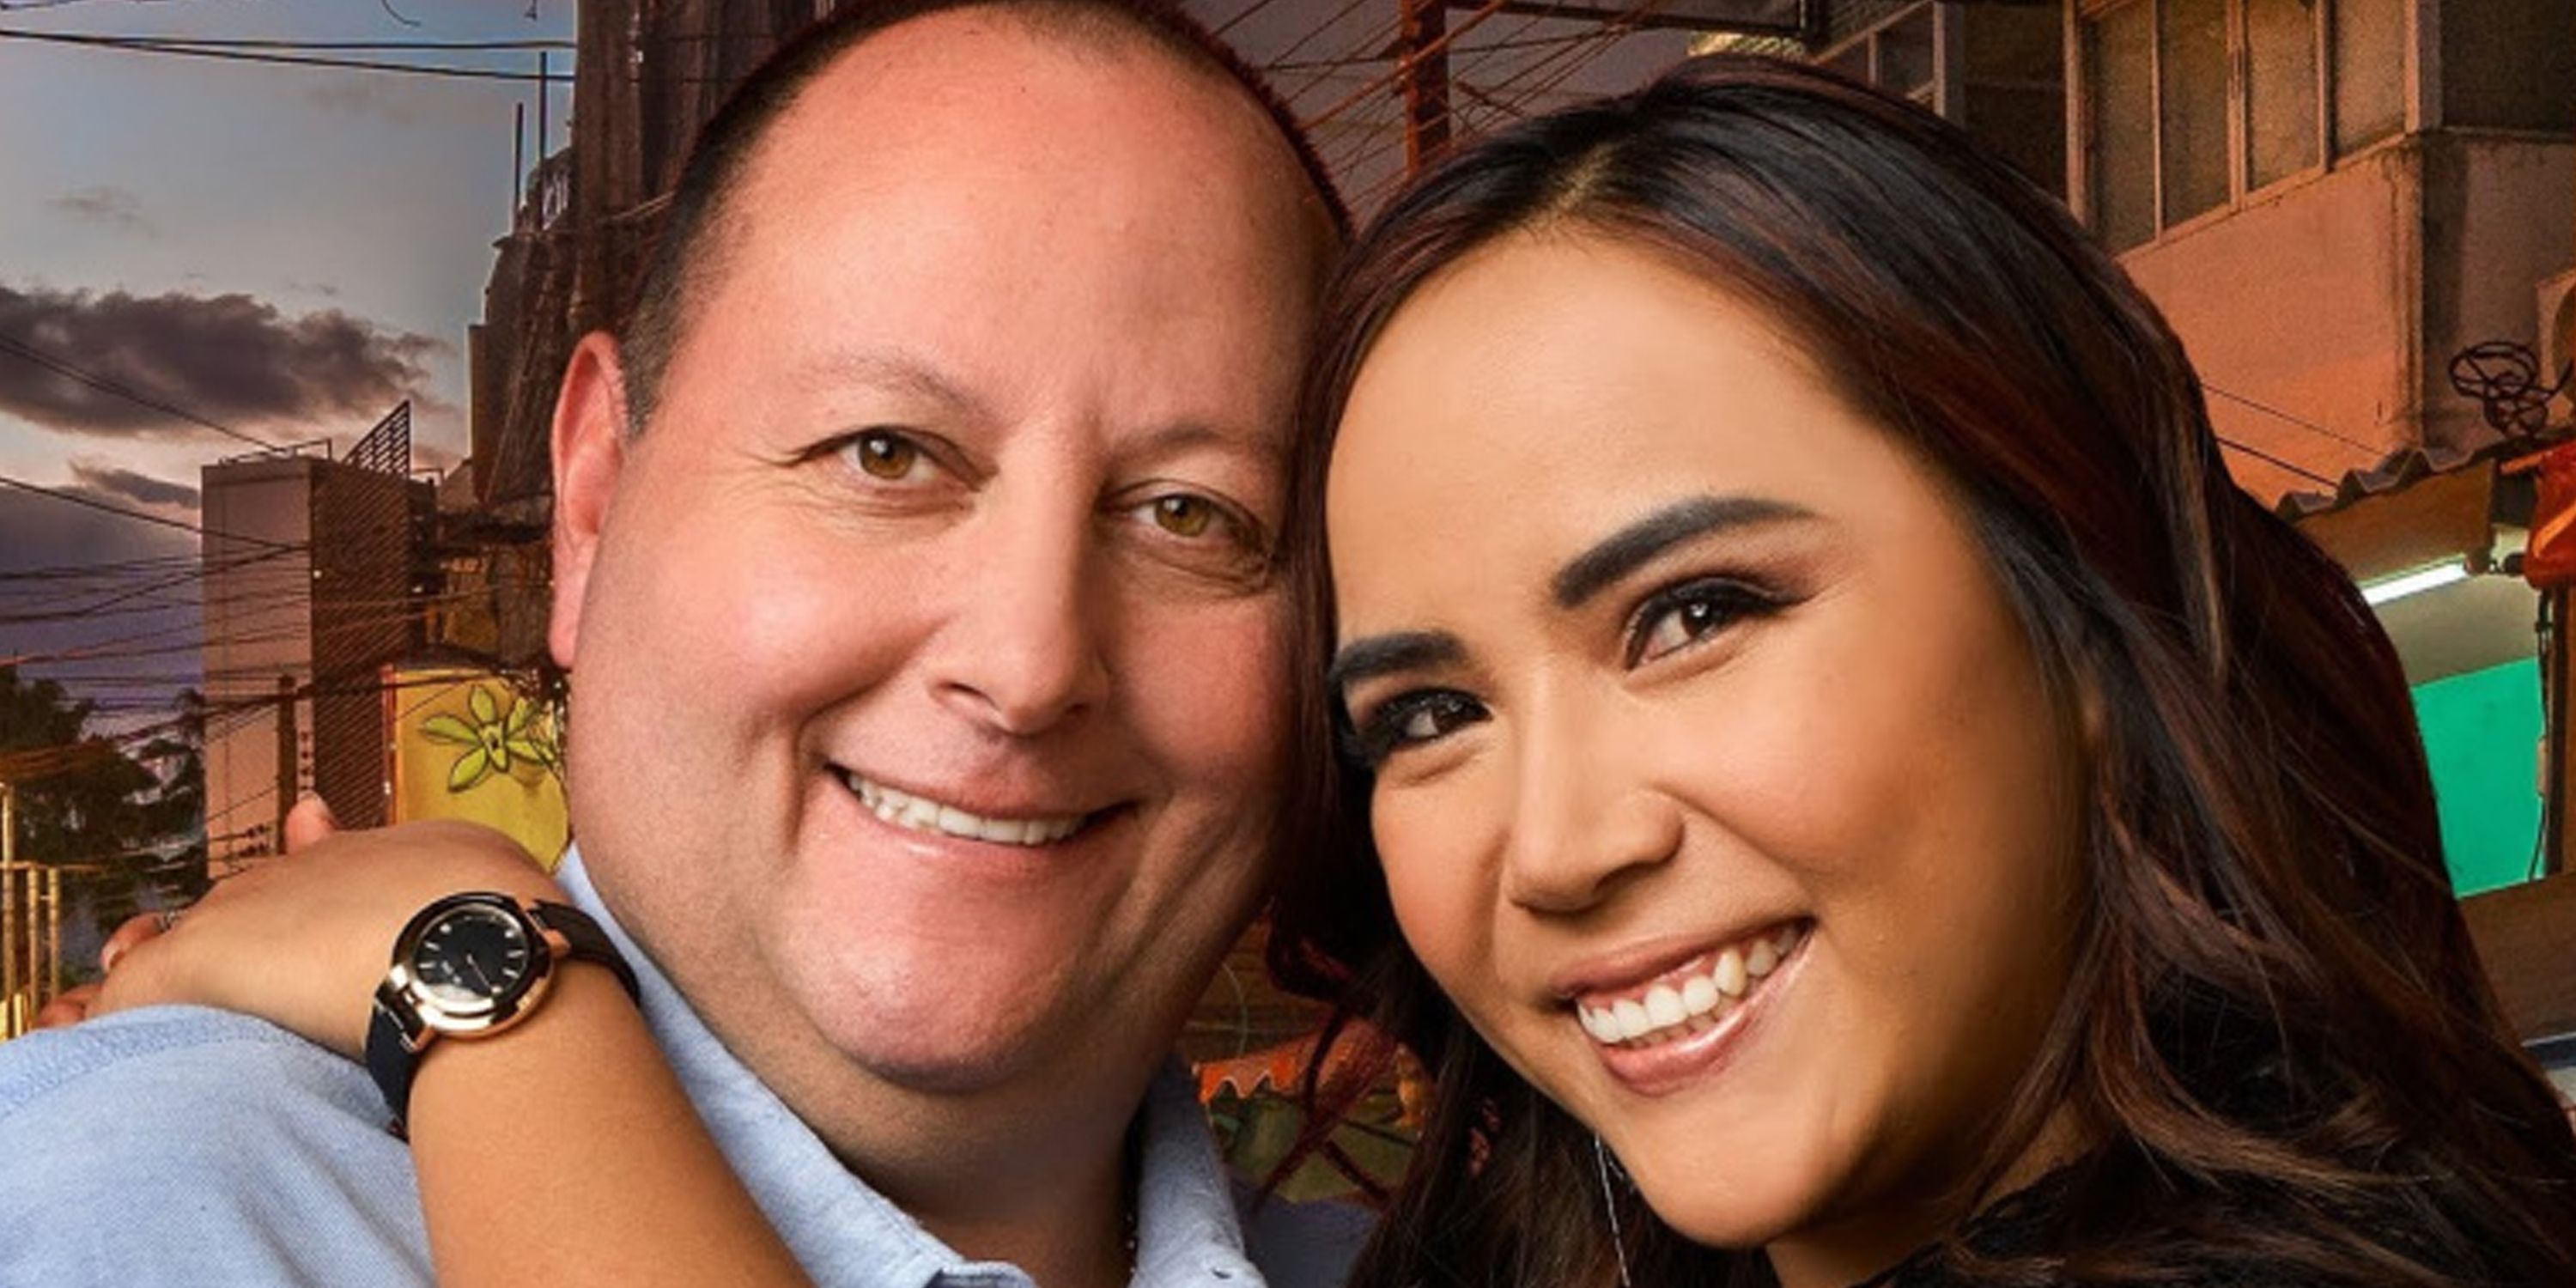 David Toborowsky with Annie Suwan from 90 Day Fiancé smiling and holding each other